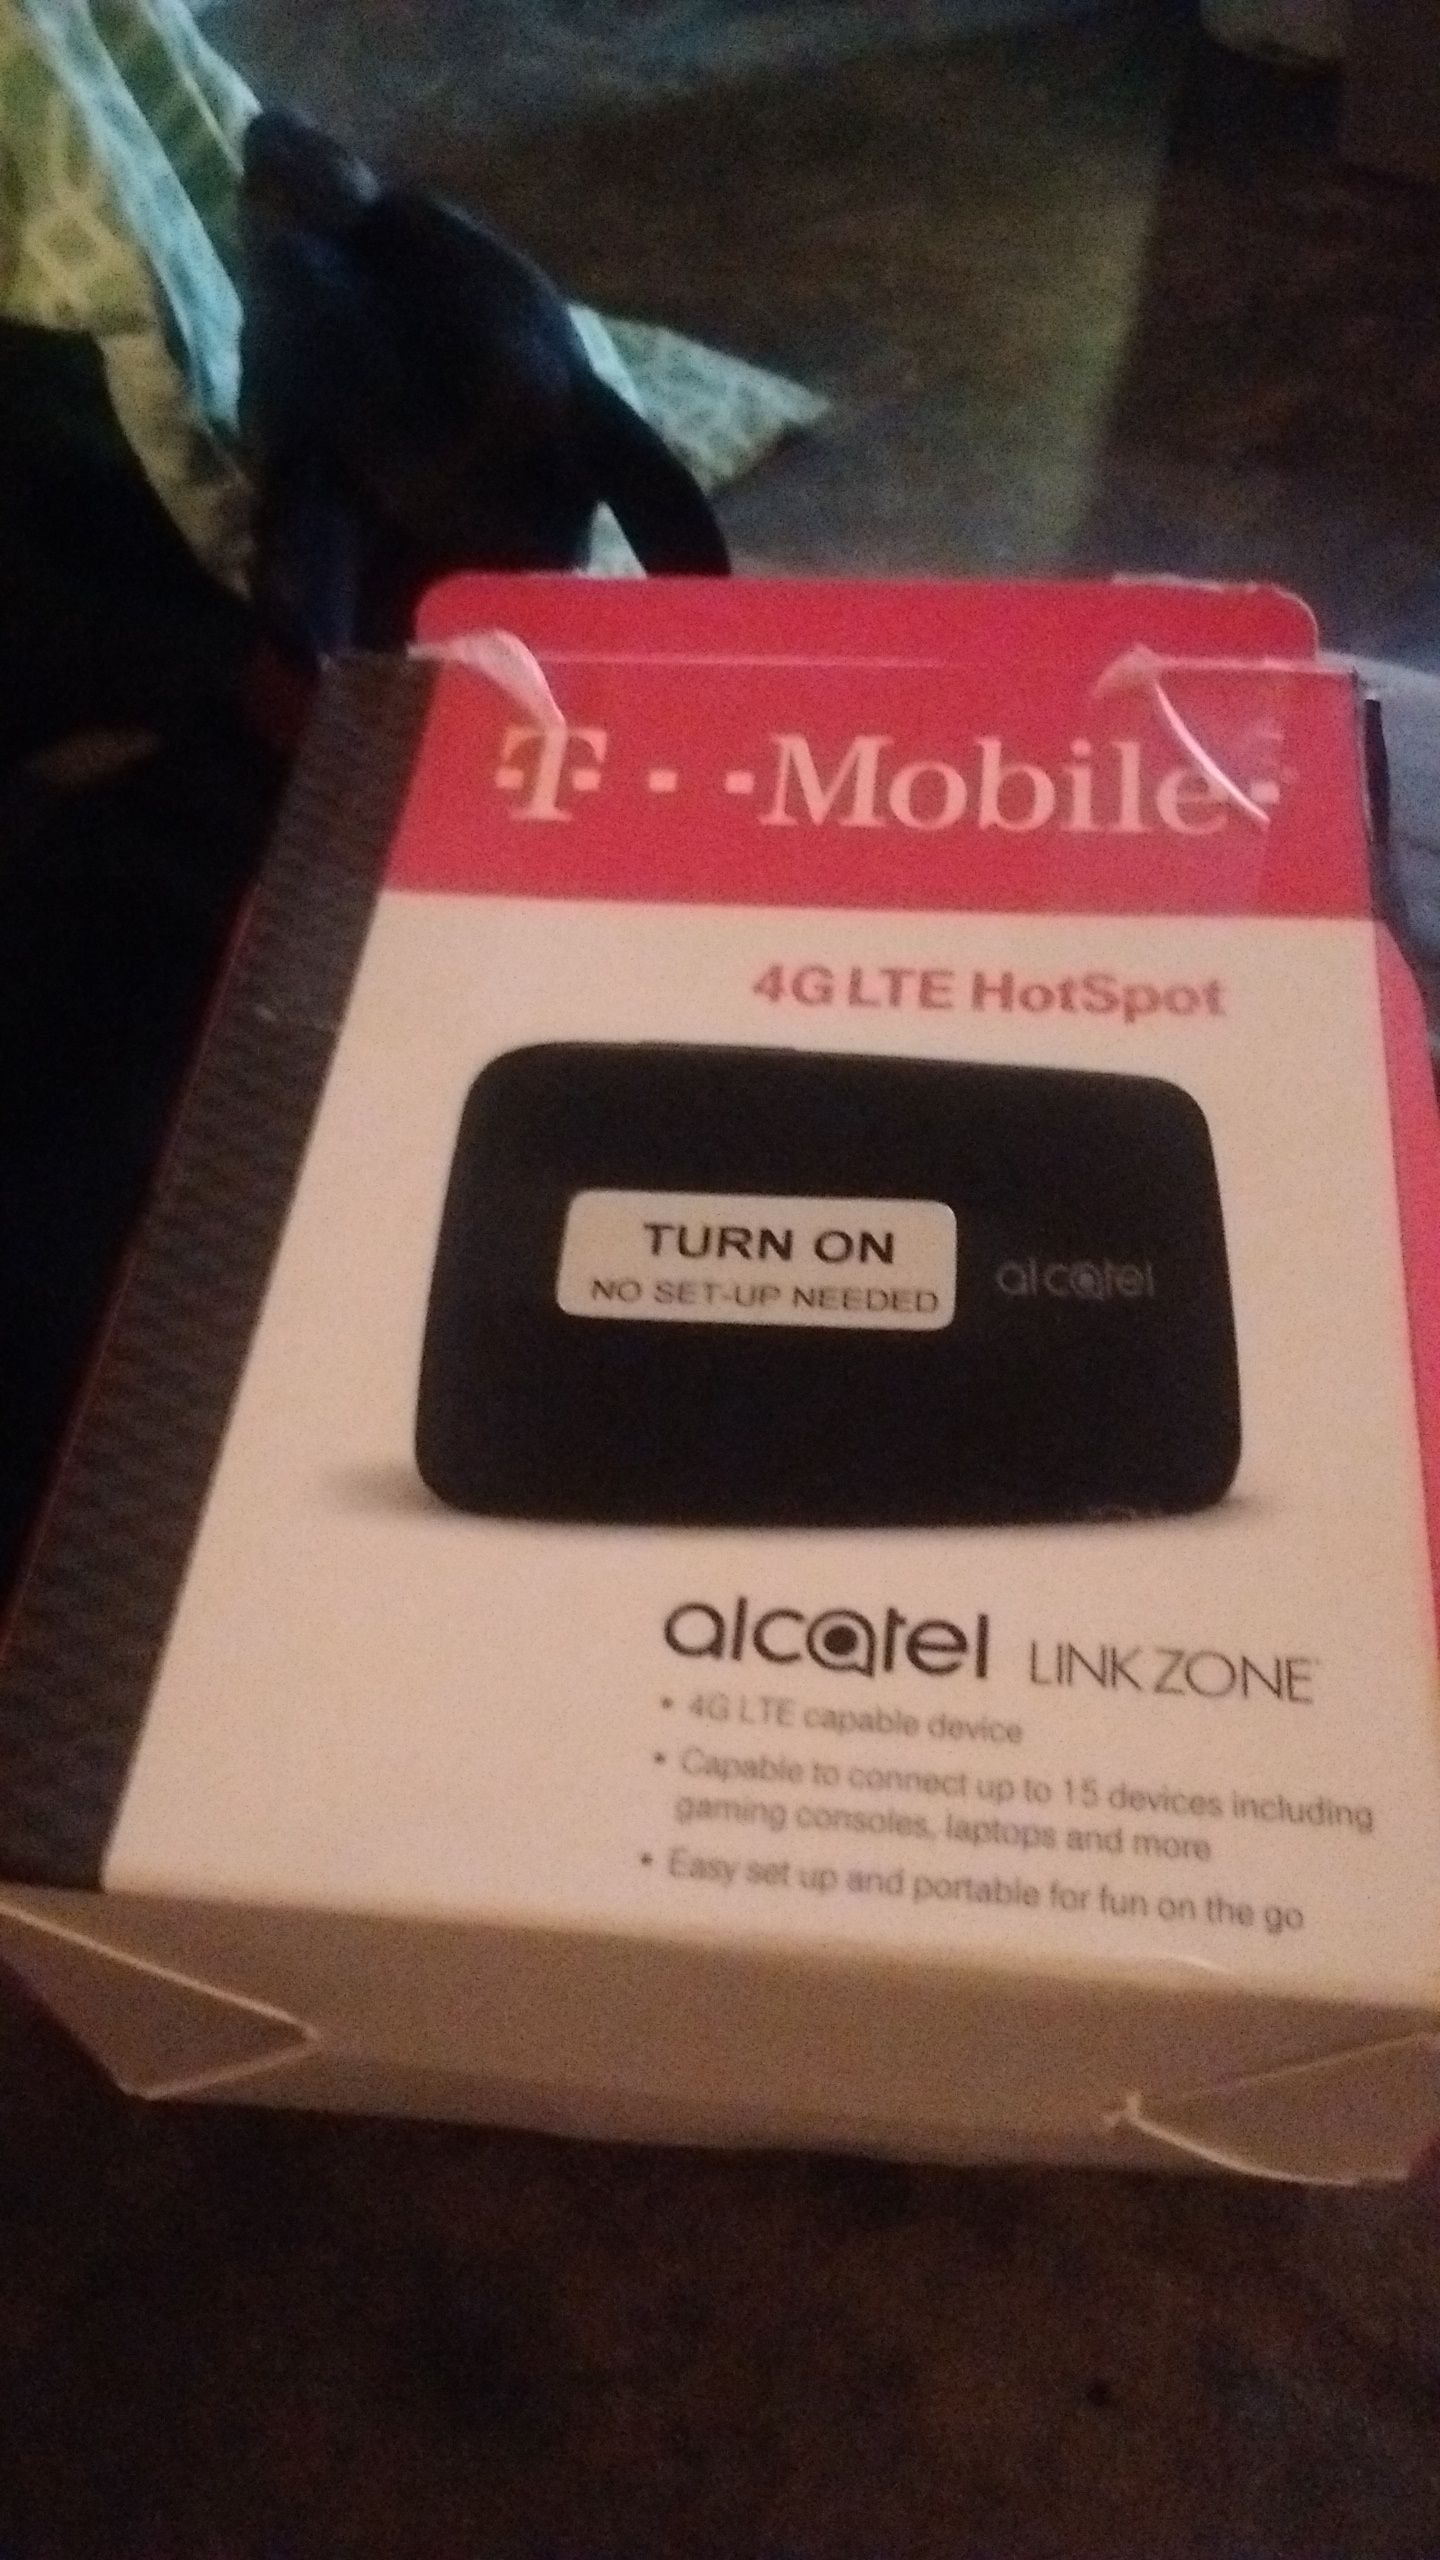 Tmobil internet hotspot box. Brand new. Does not work in my area